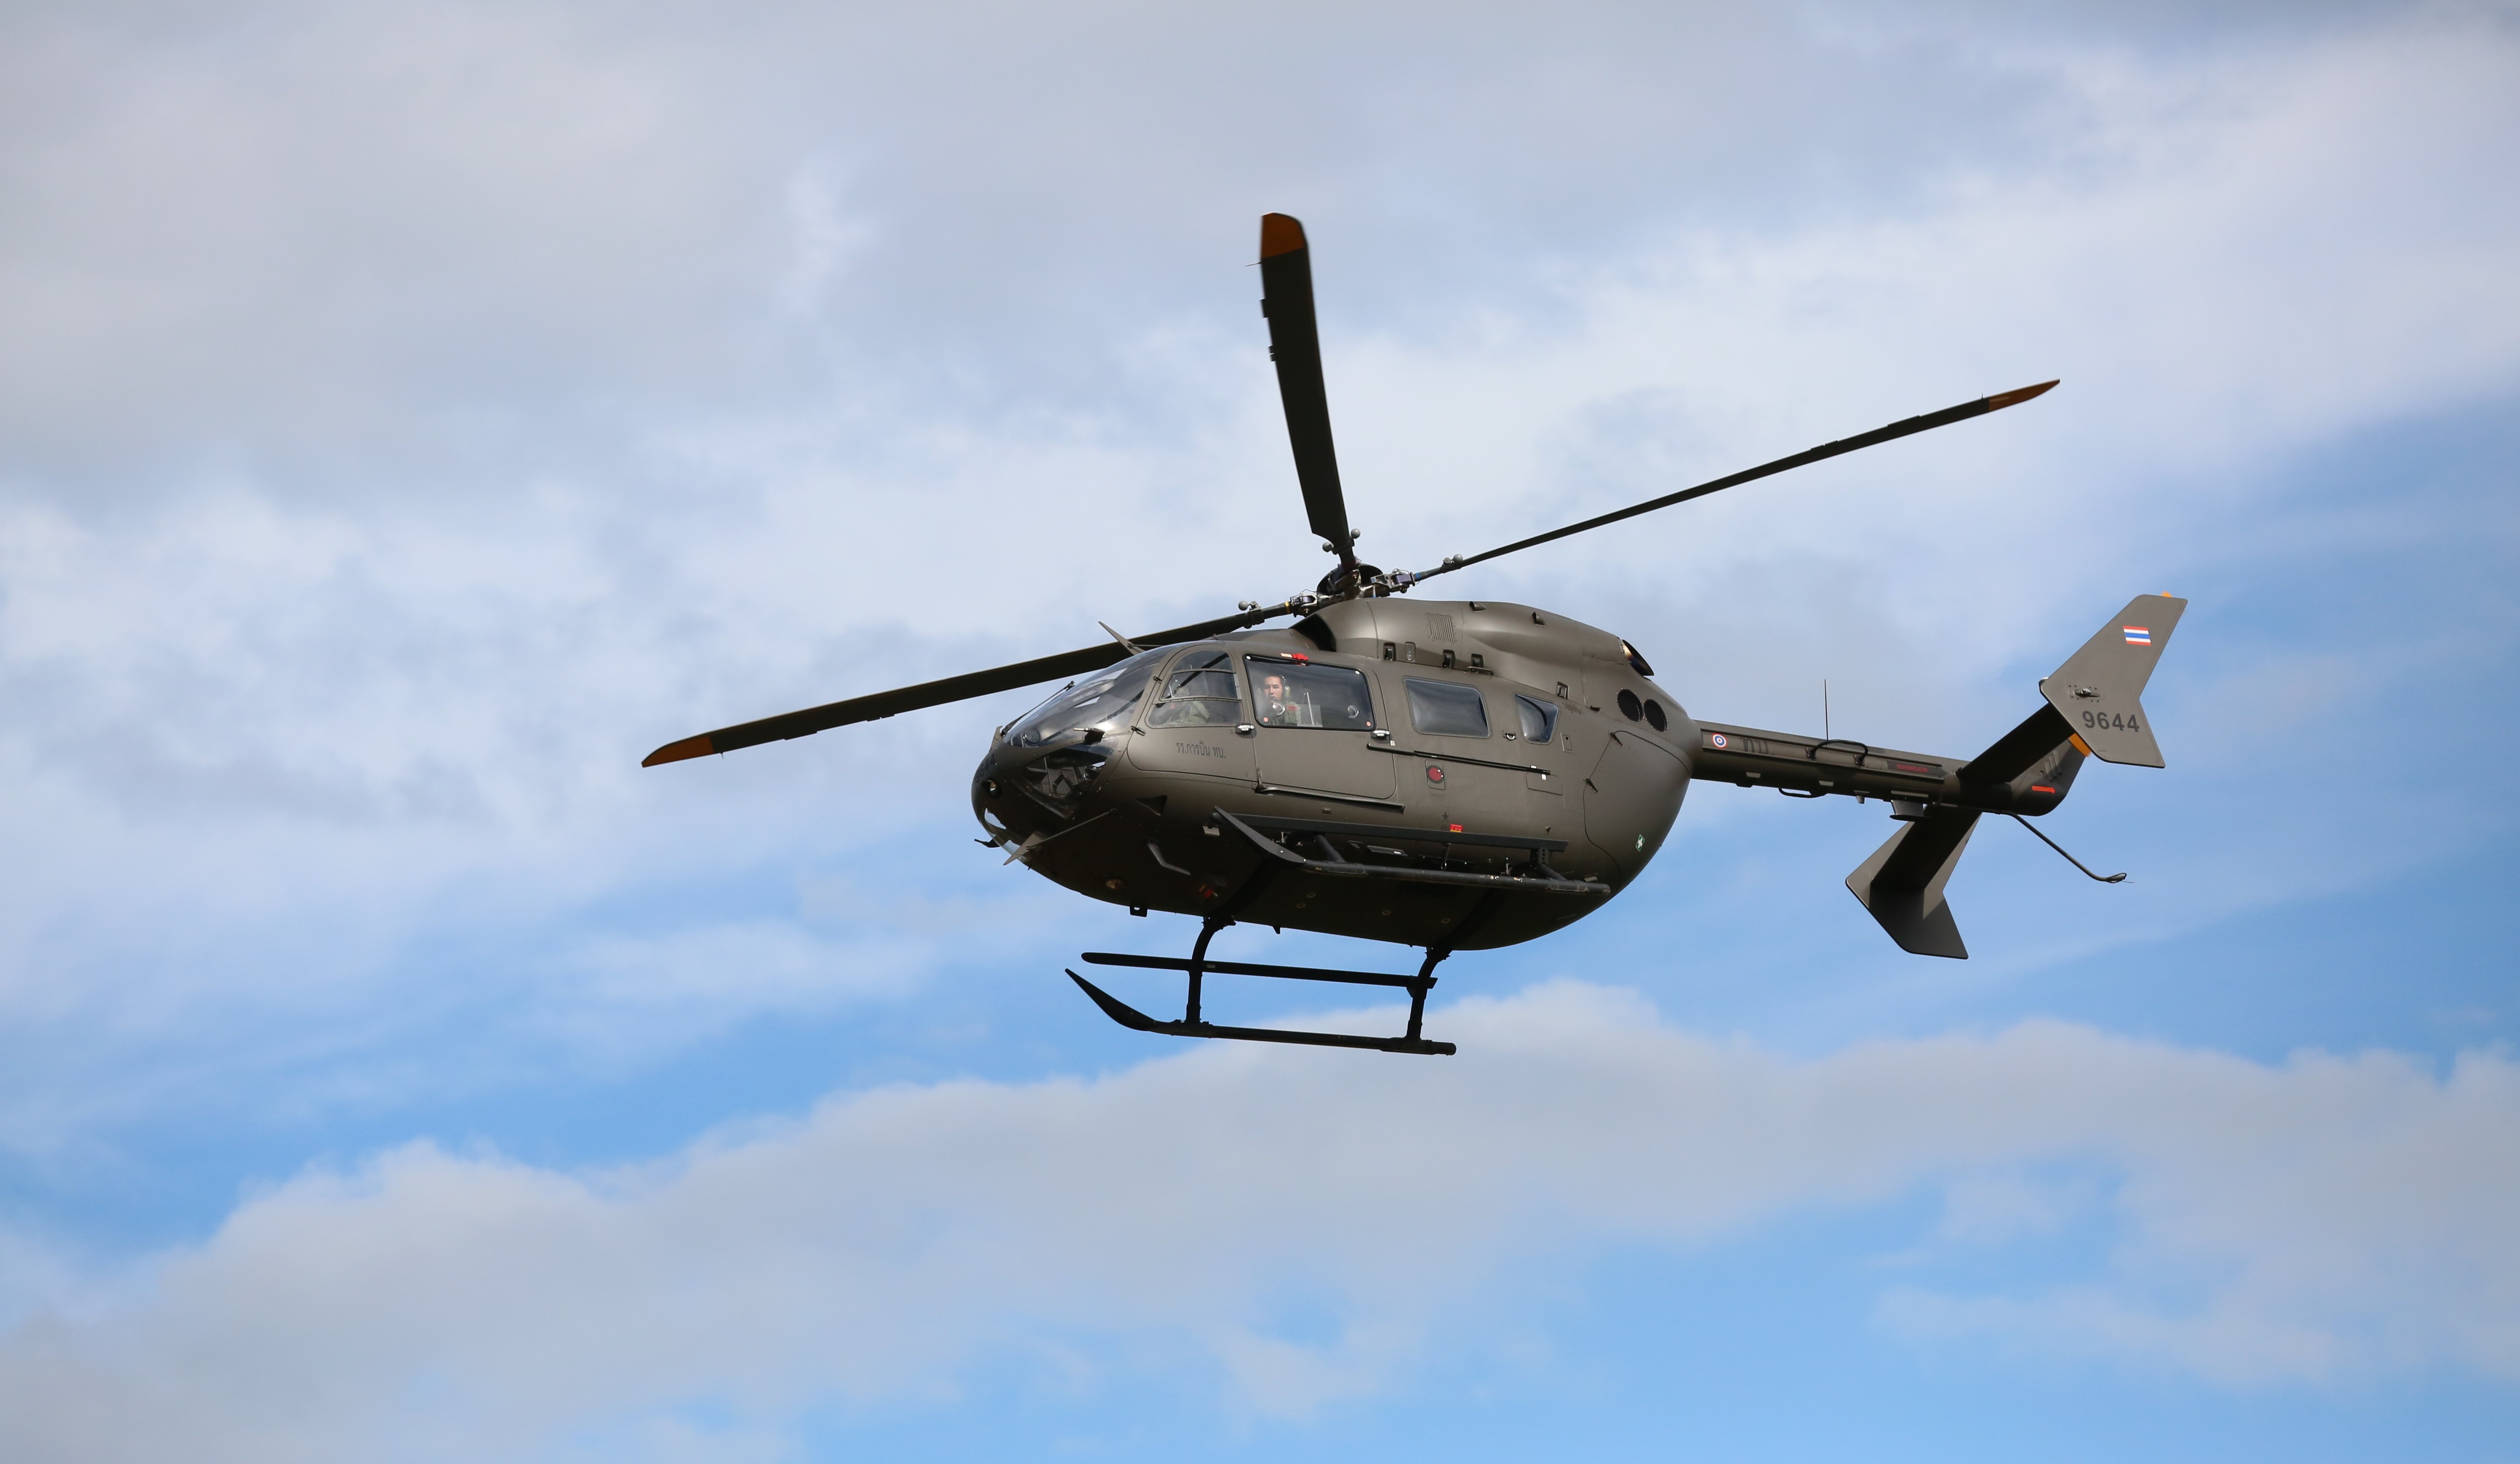 Gray Helicopter on Air - imgXimg HD Wallpapers